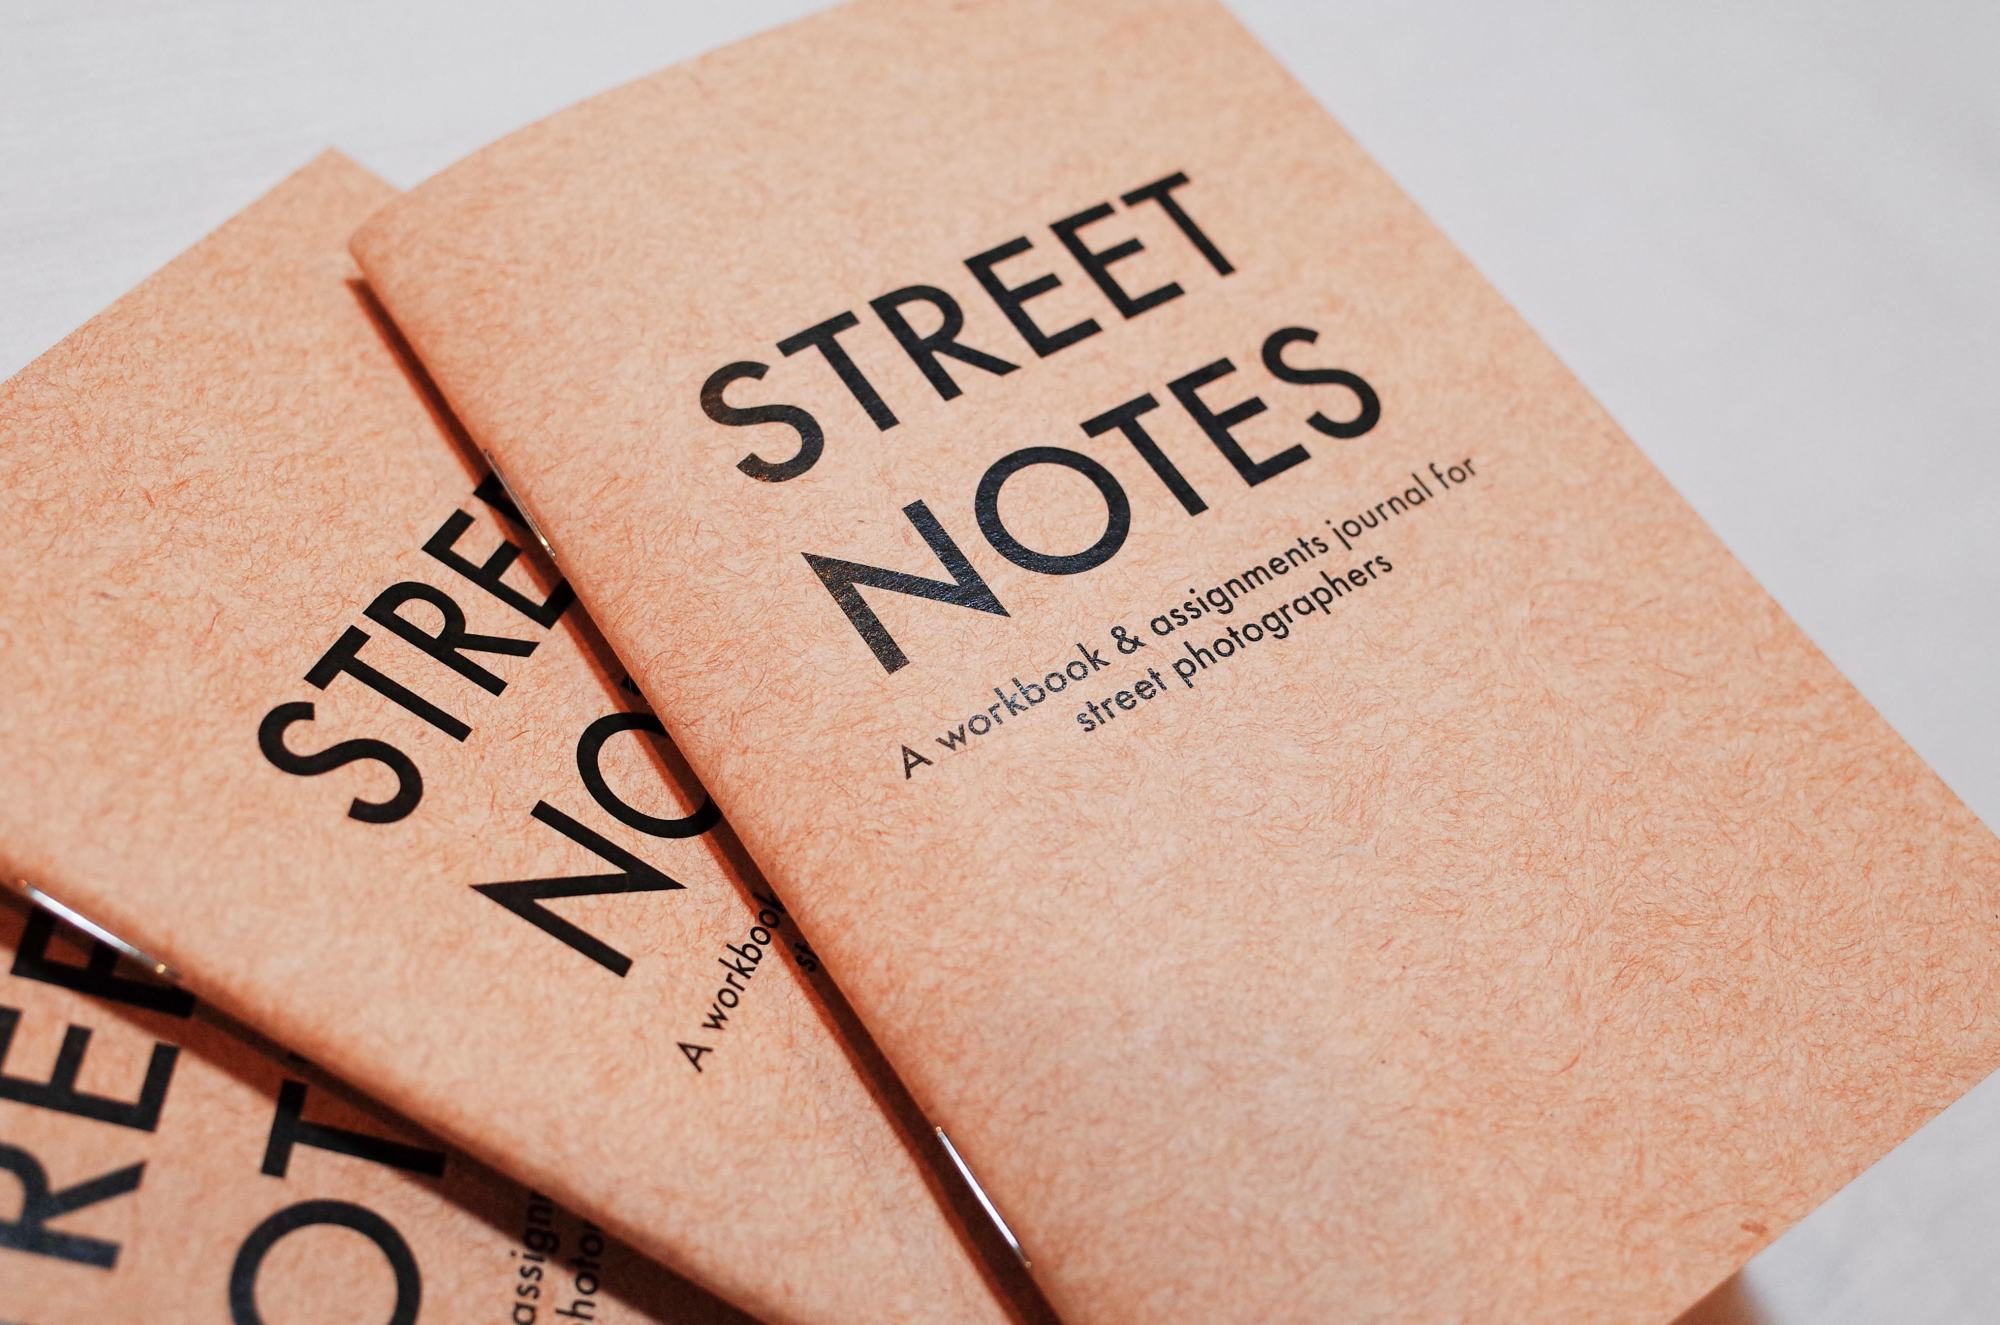 eric-kim-street-notes-a-workbook-and-assignments-journal-for-street-photographers